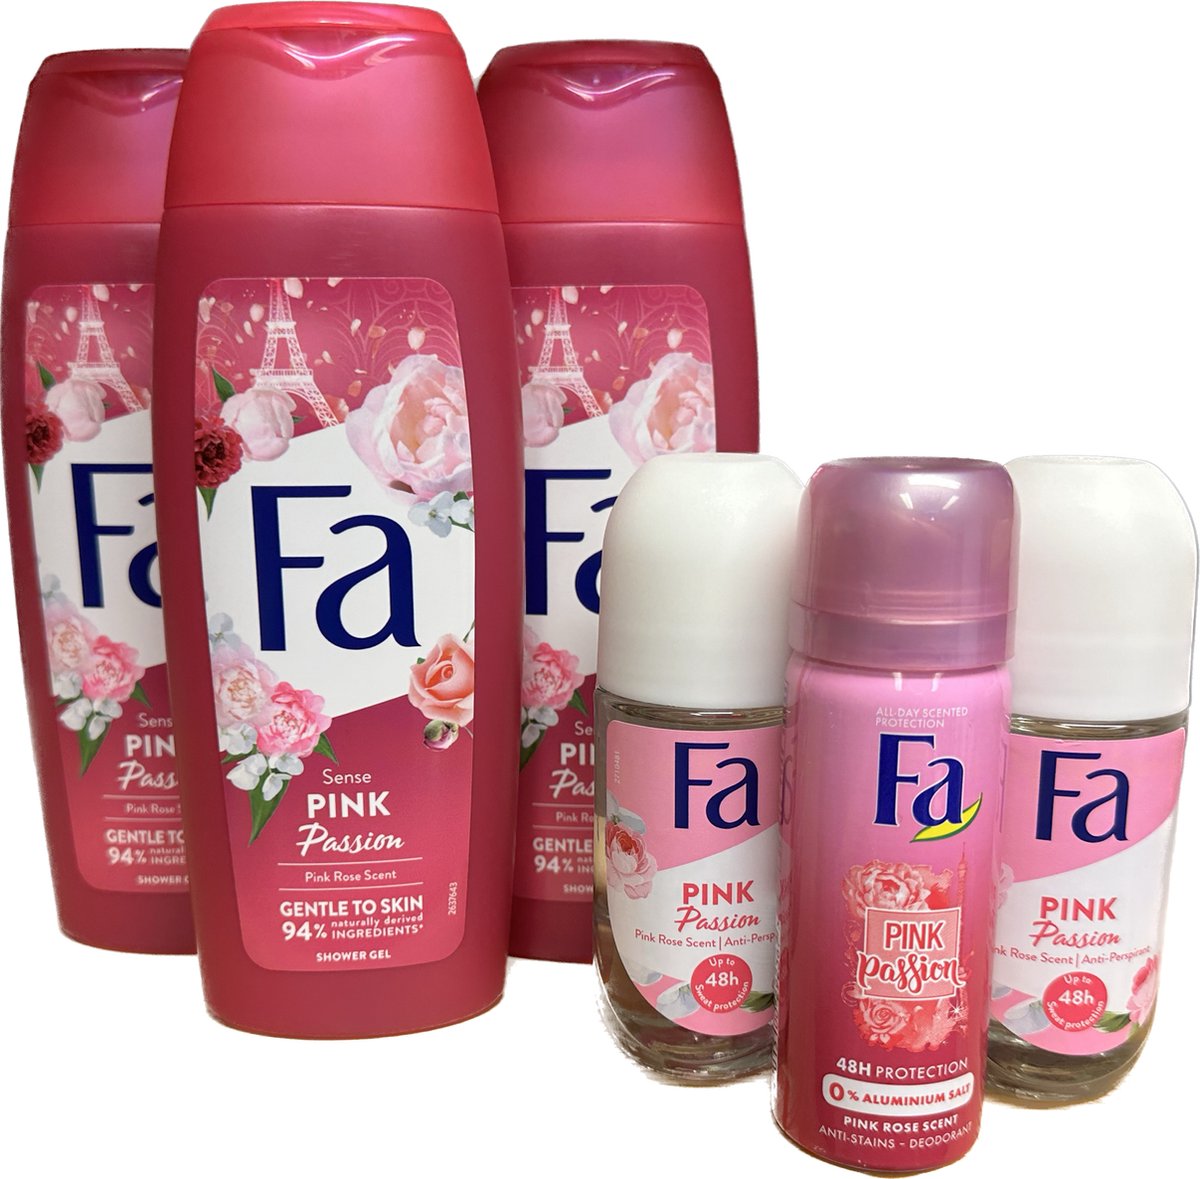 FA Pink Passion Pakket - Douchegel / Deo Roller / Deo Spray